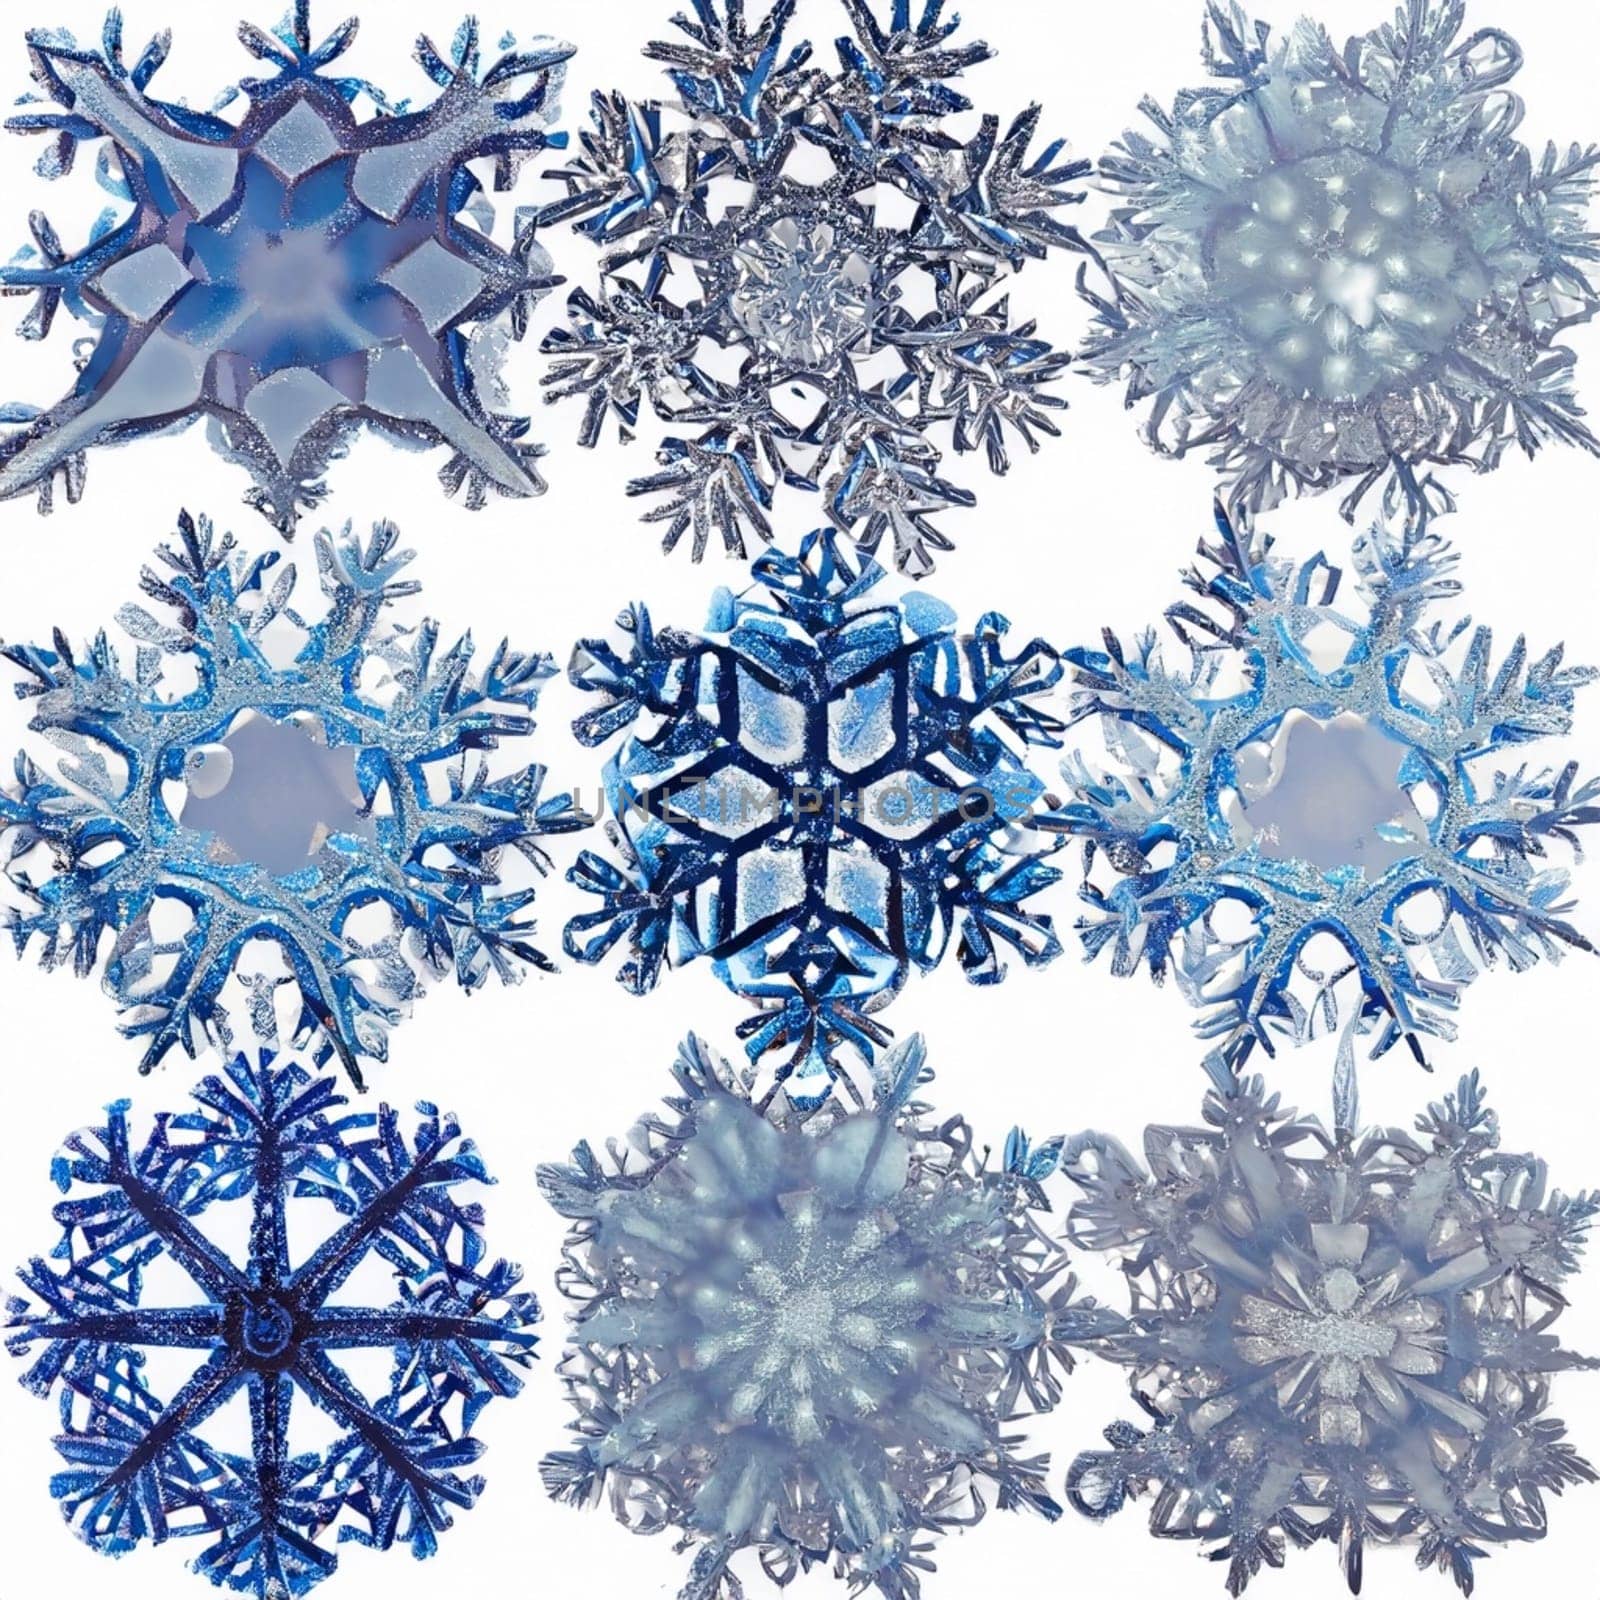 set of snowflakes. global colors used. elements grouped. Snowflake Decoration Christmas Winter set of snowflakes features unique and intricate designs, capturing the beauty and wonder of winter. by Costin